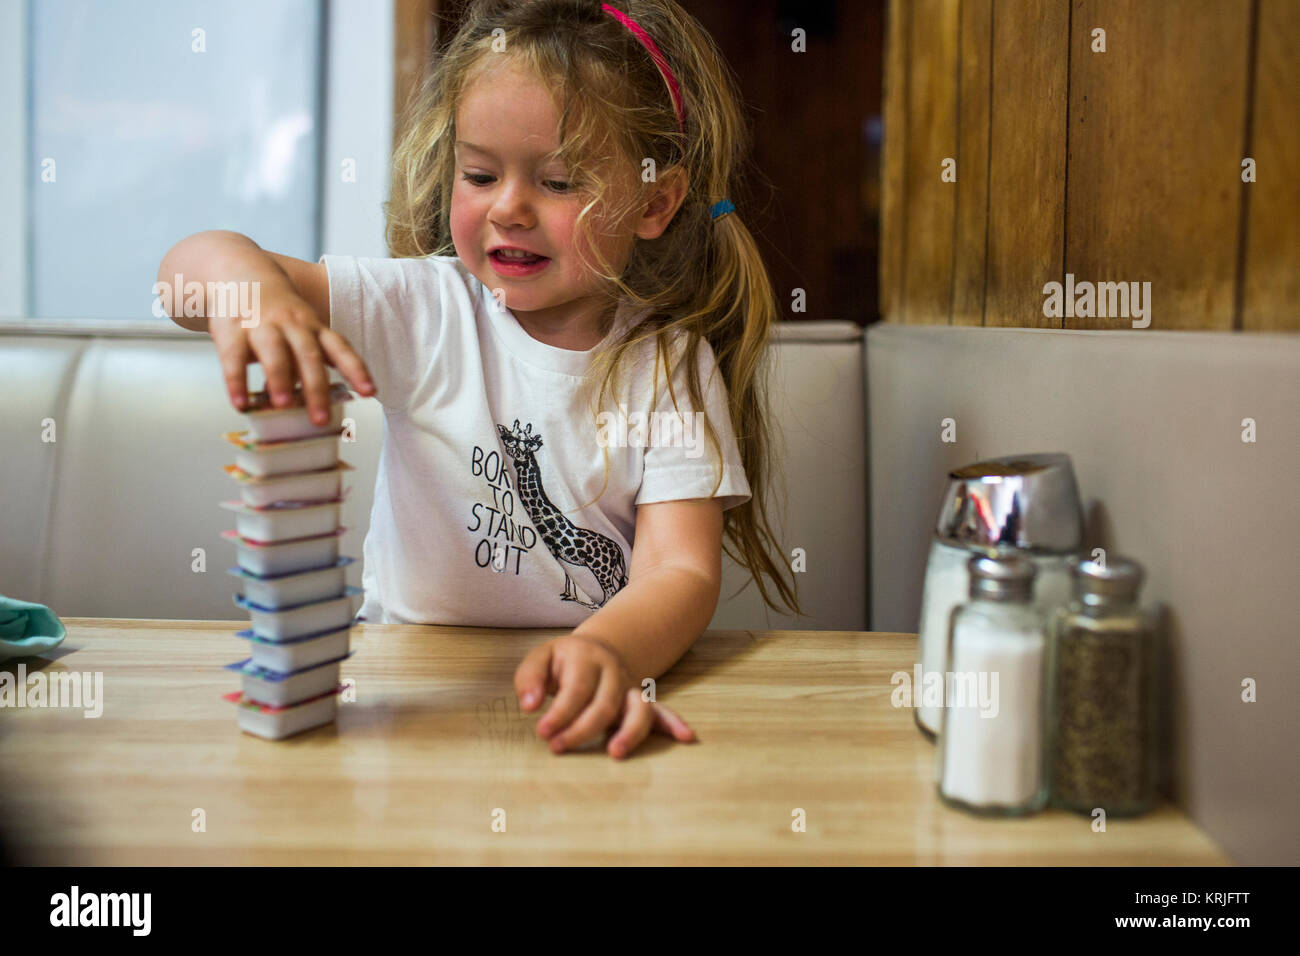 Smiling Caucasian girl stacking jelly containers in restaurant booth Stock Photo